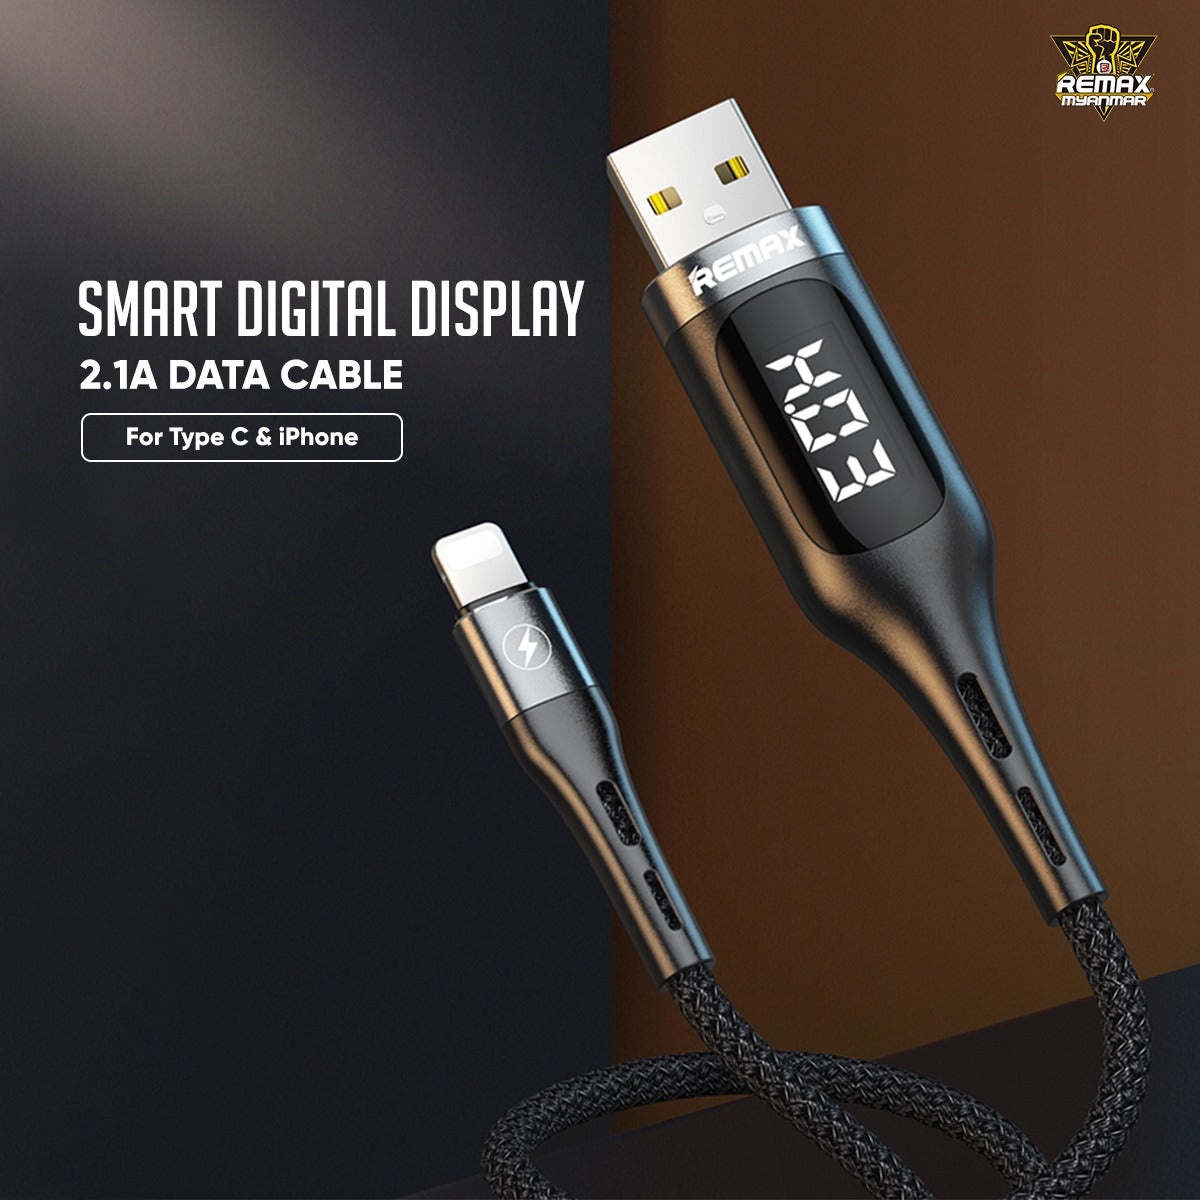 REMAX-RC-096I LEADER SMART DISPLAY 2.1A DATA CABLE FOR LIGHTNING,Lightning Cable,iPhone Data Cable,iPhone Charging Cable,iPhone Lightning charging cable ,Best lightning cable for iPhone,Apple iPhone Cable,iPhone USB Cable,Apple Lightning to USB Cable